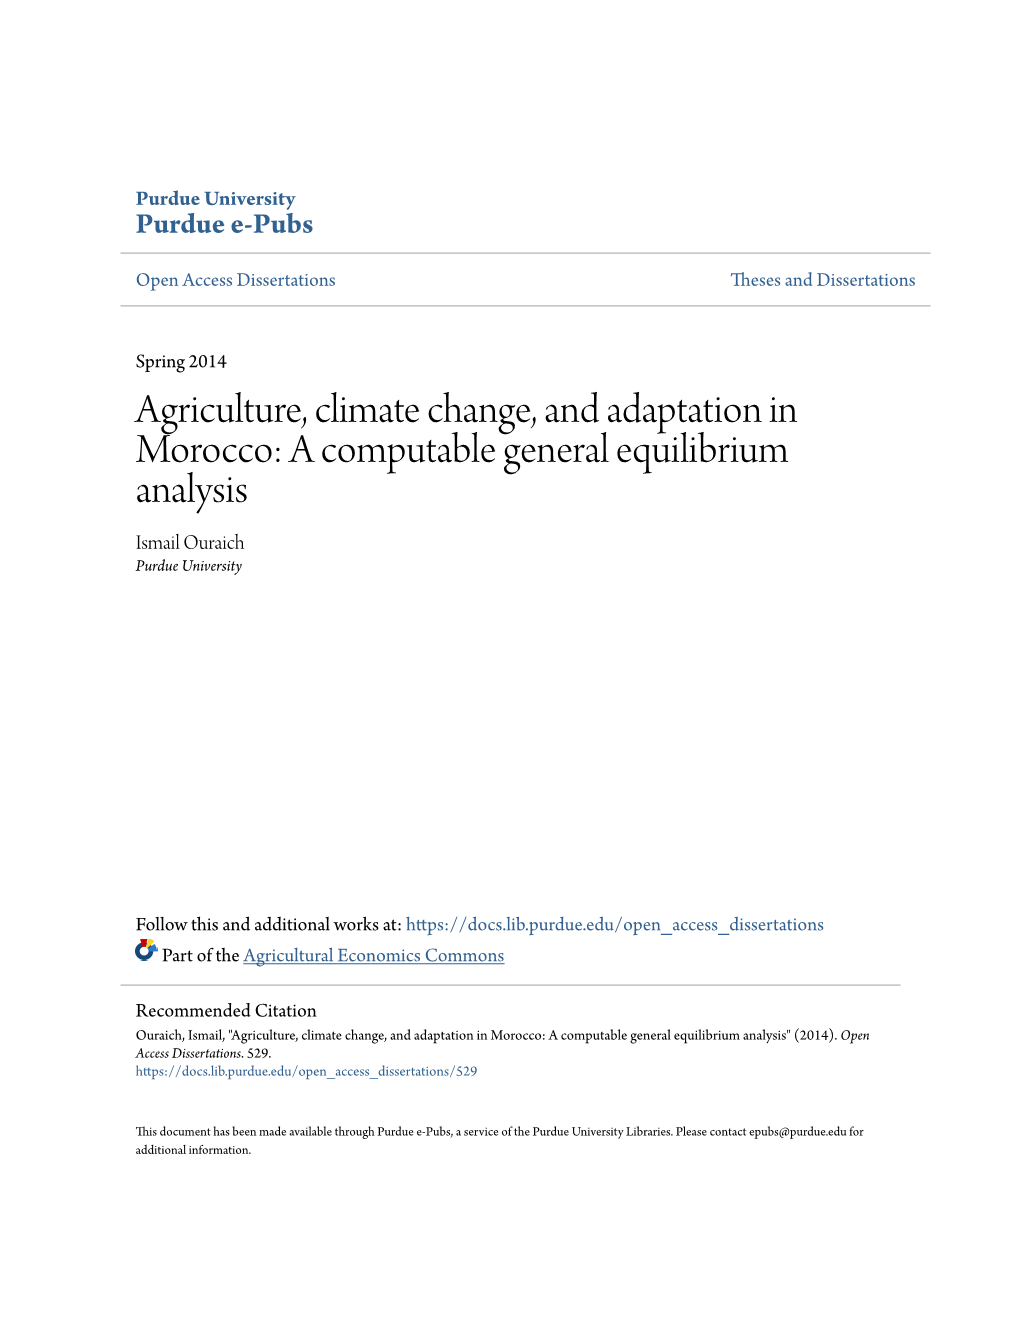 Agriculture, Climate Change, and Adaptation in Morocco: a Computable General Equilibrium Analysis Ismail Ouraich Purdue University